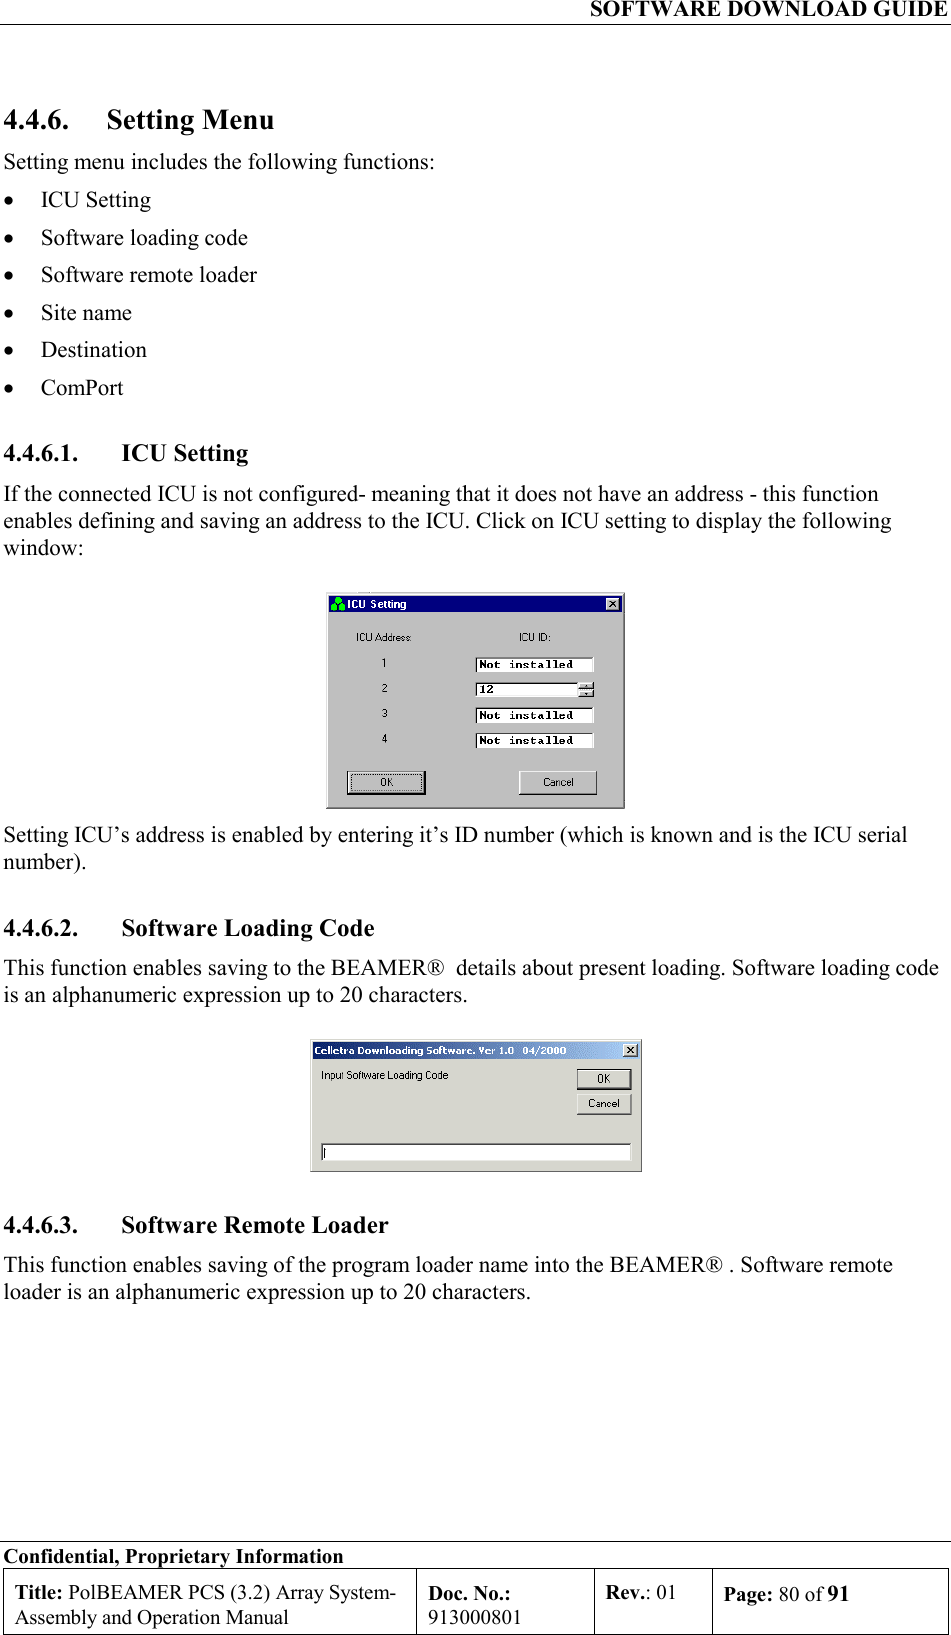   SOFTWARE DOWNLOAD GUIDE Confidential, Proprietary Information Title: PolBEAMER PCS (3.2) Array System- Assembly and Operation Manual Doc. No.: 913000801 Rev.: 01  Page: 80 of 91  4.4.6. Setting Menu Setting menu includes the following functions: •  ICU Setting •  Software loading code •  Software remote loader •  Site name •  Destination •  ComPort 4.4.6.1. ICU Setting If the connected ICU is not configured- meaning that it does not have an address - this function enables defining and saving an address to the ICU. Click on ICU setting to display the following window:  Setting ICU’s address is enabled by entering it’s ID number (which is known and is the ICU serial number).  4.4.6.2.  Software Loading Code This function enables saving to the BEAMER®  details about present loading. Software loading code is an alphanumeric expression up to 20 characters.  4.4.6.3.  Software Remote Loader This function enables saving of the program loader name into the BEAMER® . Software remote loader is an alphanumeric expression up to 20 characters. 